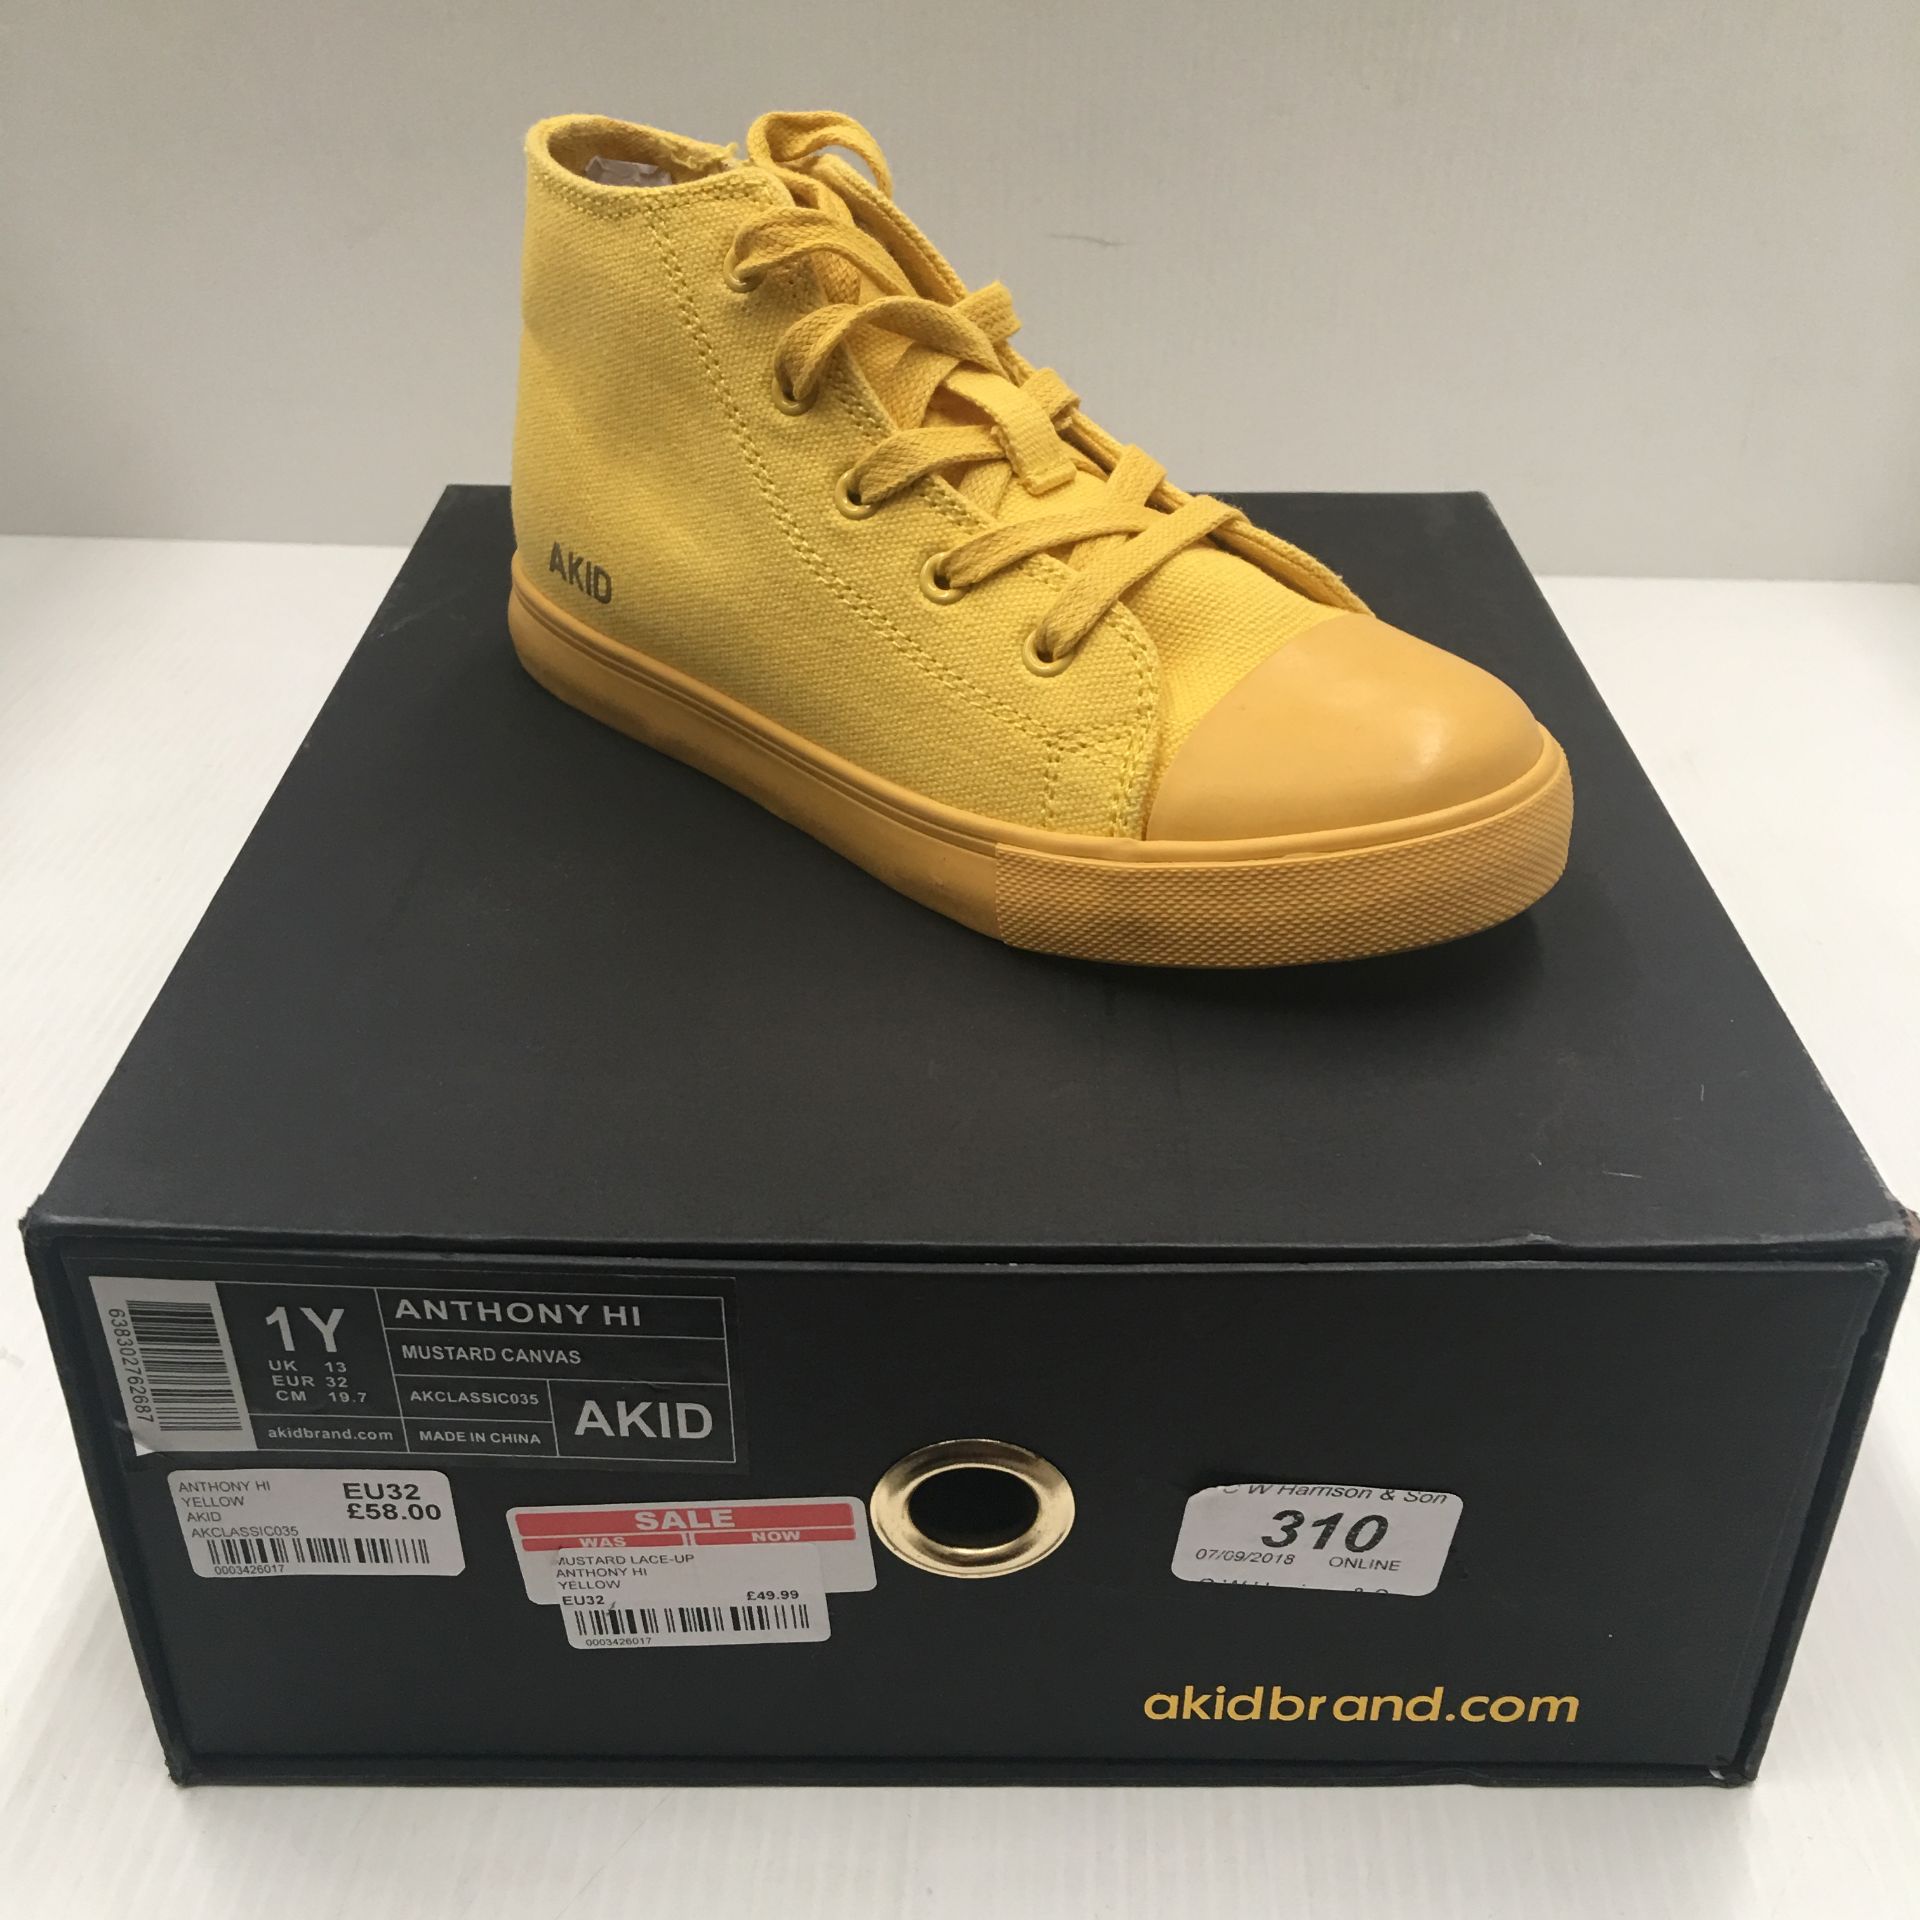 1 x pair of children's shoes - Akid Anth